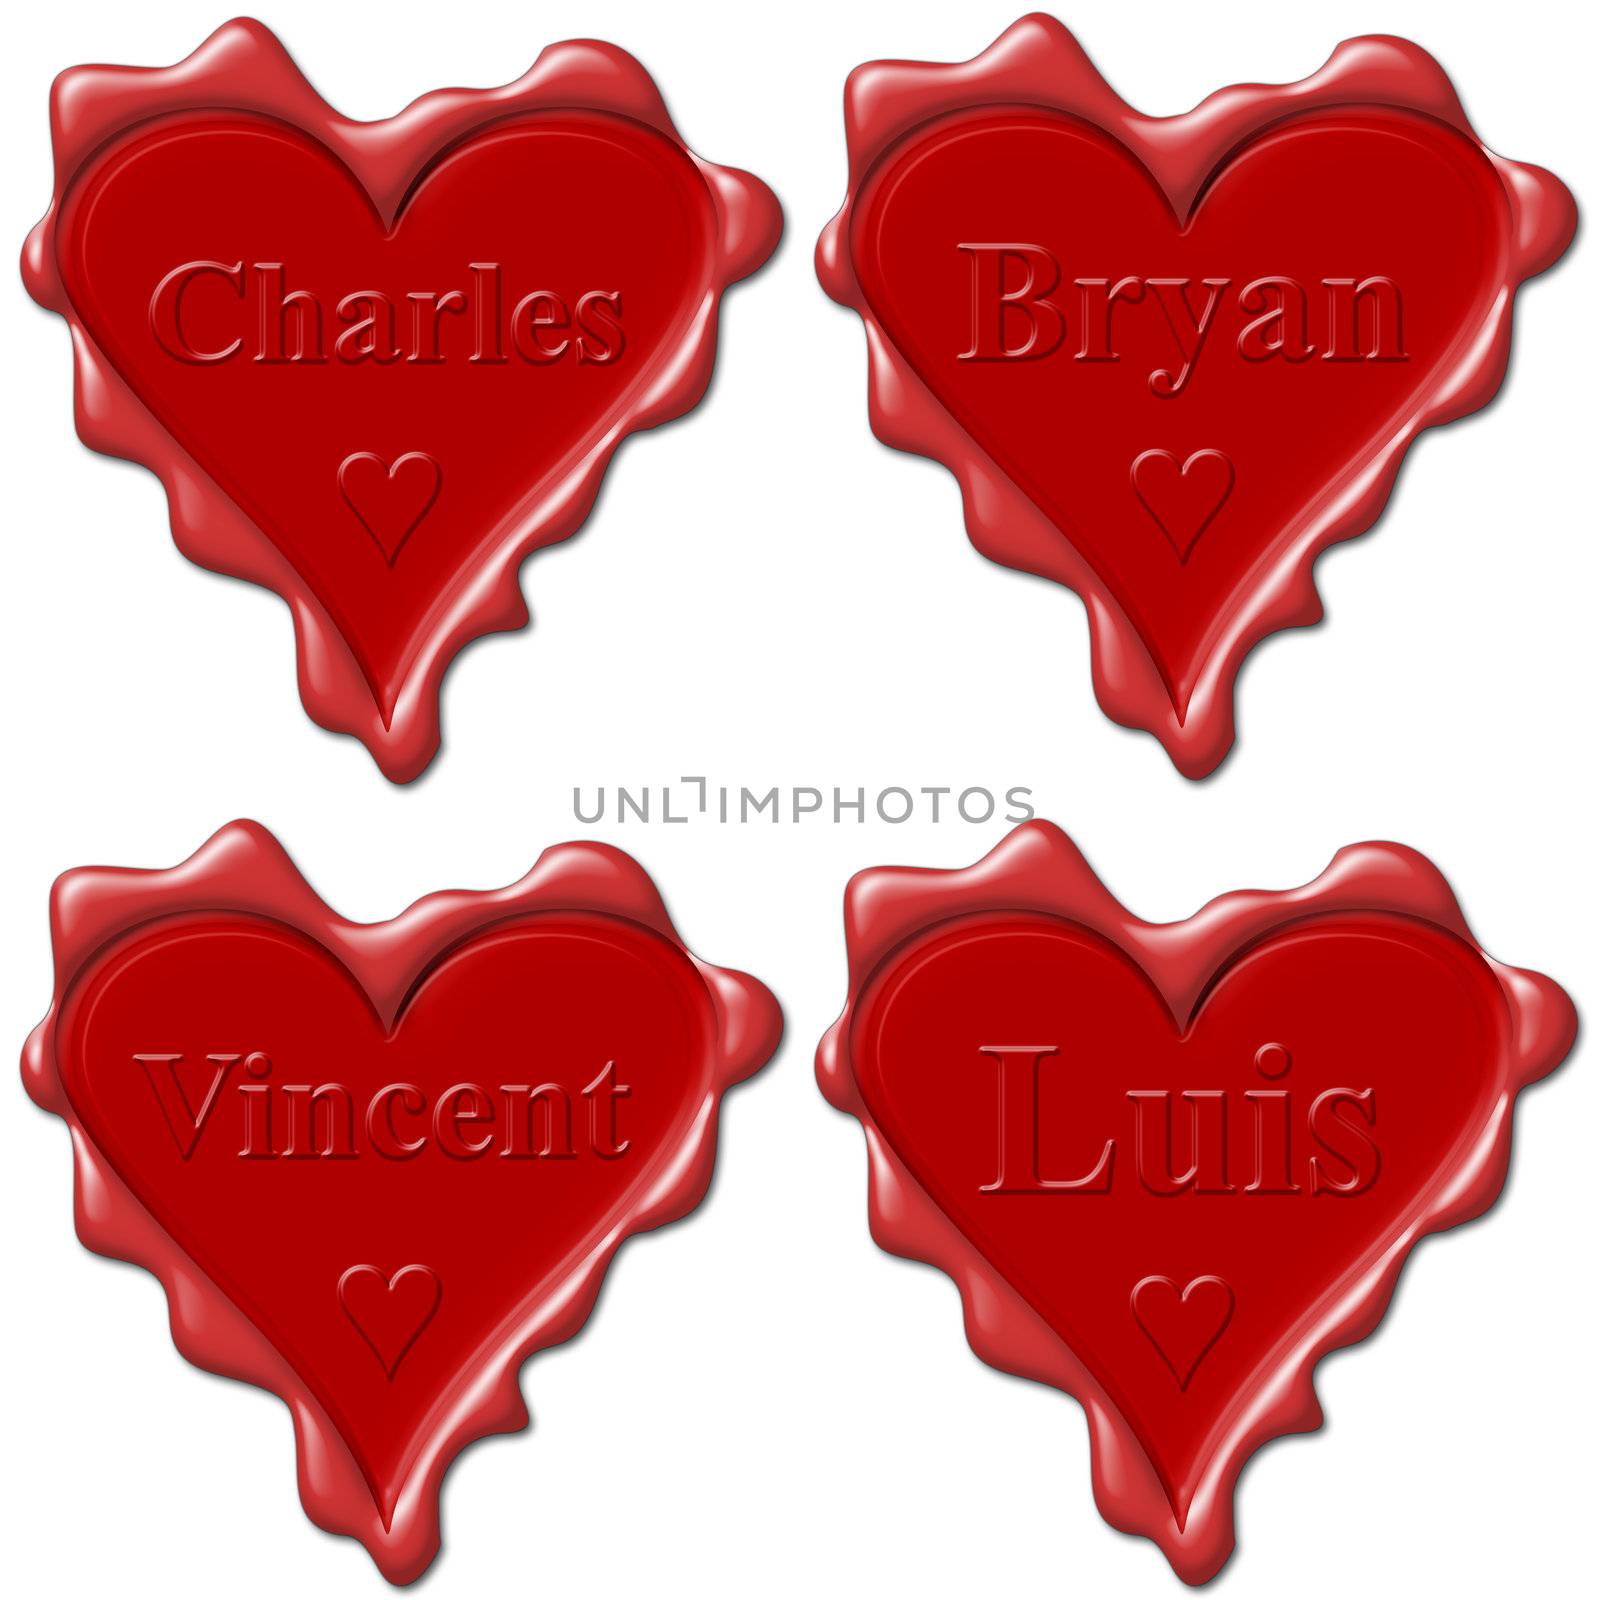 Valentine love hearts with names: Charles, Bryan, Vincent, Luis by mozzyb